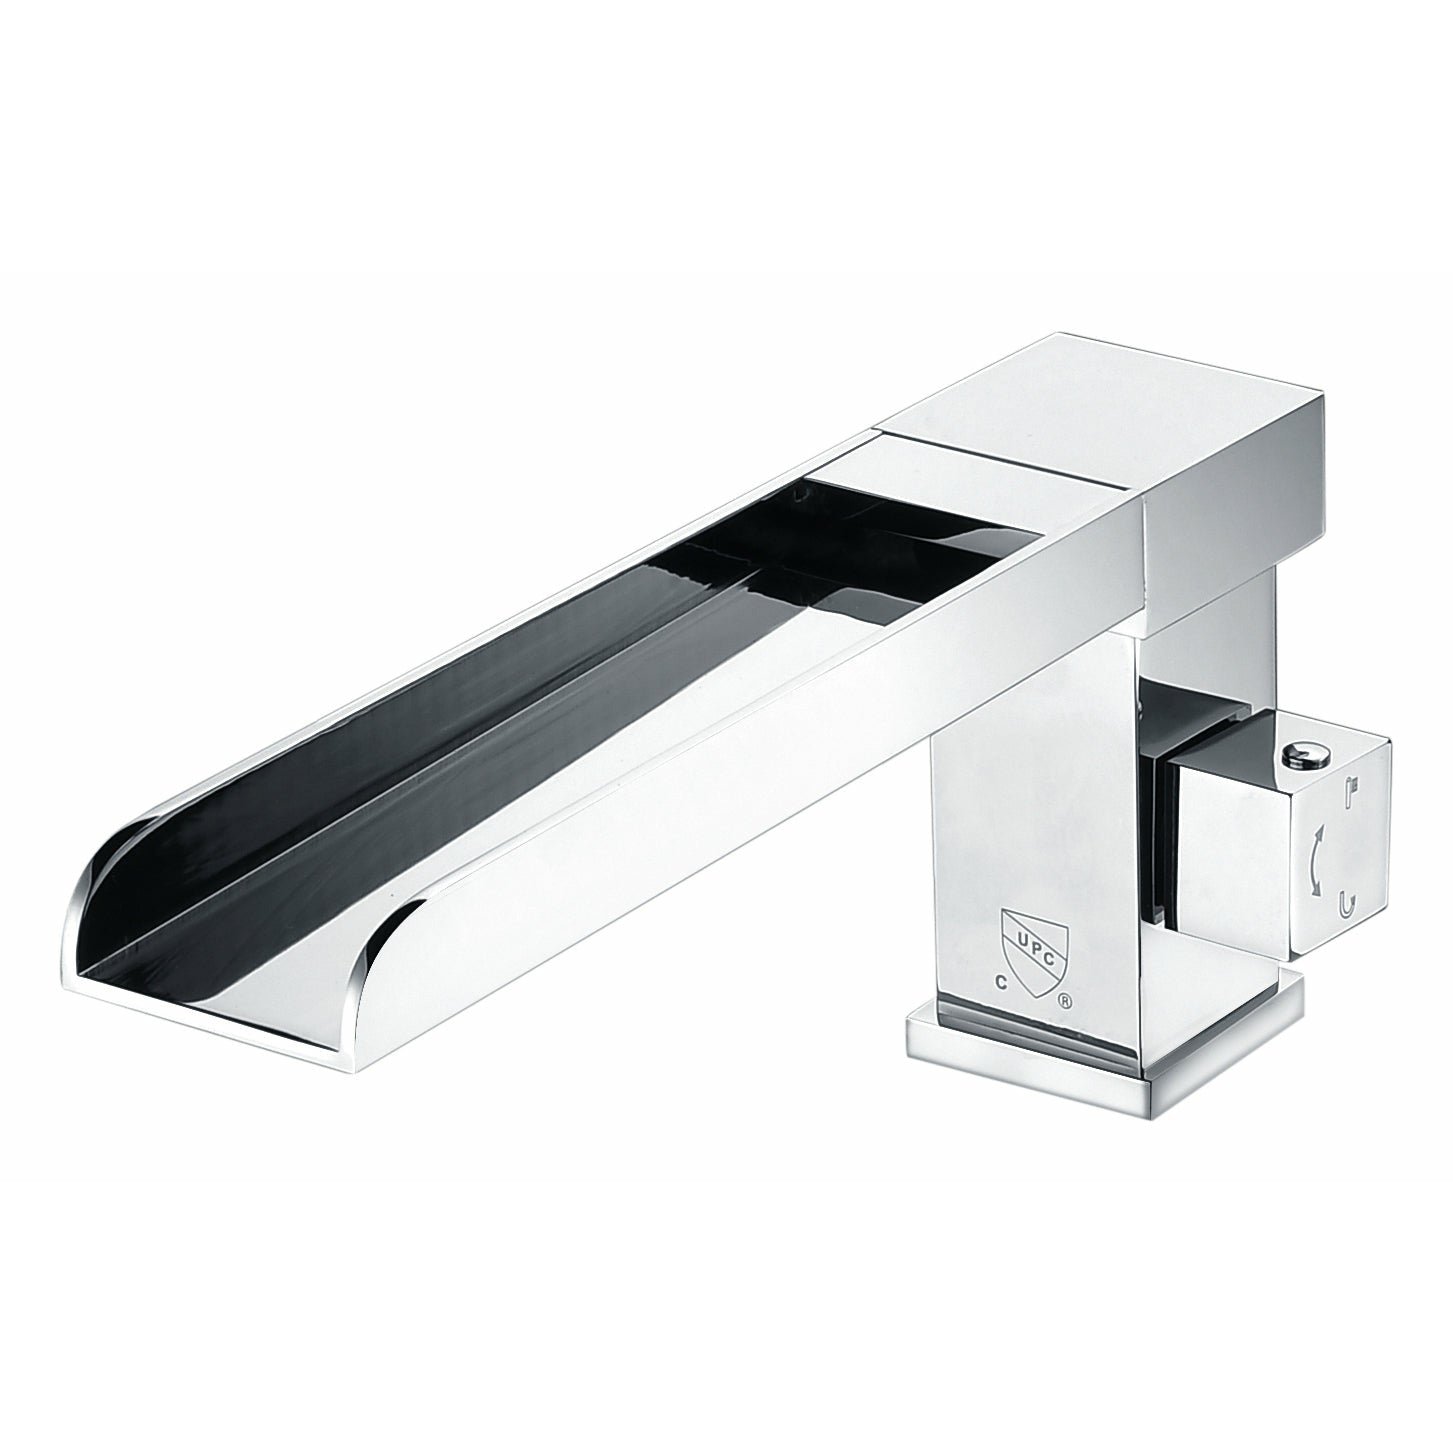 Anzzi Glymur 2-handle Deck-mount Roman Tub Faucet in Chrome - Waterfall Spout - Chrome Finish Housing a Solid Brass Interior - Extendable Euro-grip Handheld Sprayer - Dual Handle, Widespread Deck Mounted Roman Faucet - FR-AZ039CH - Vital Hydrotherapy